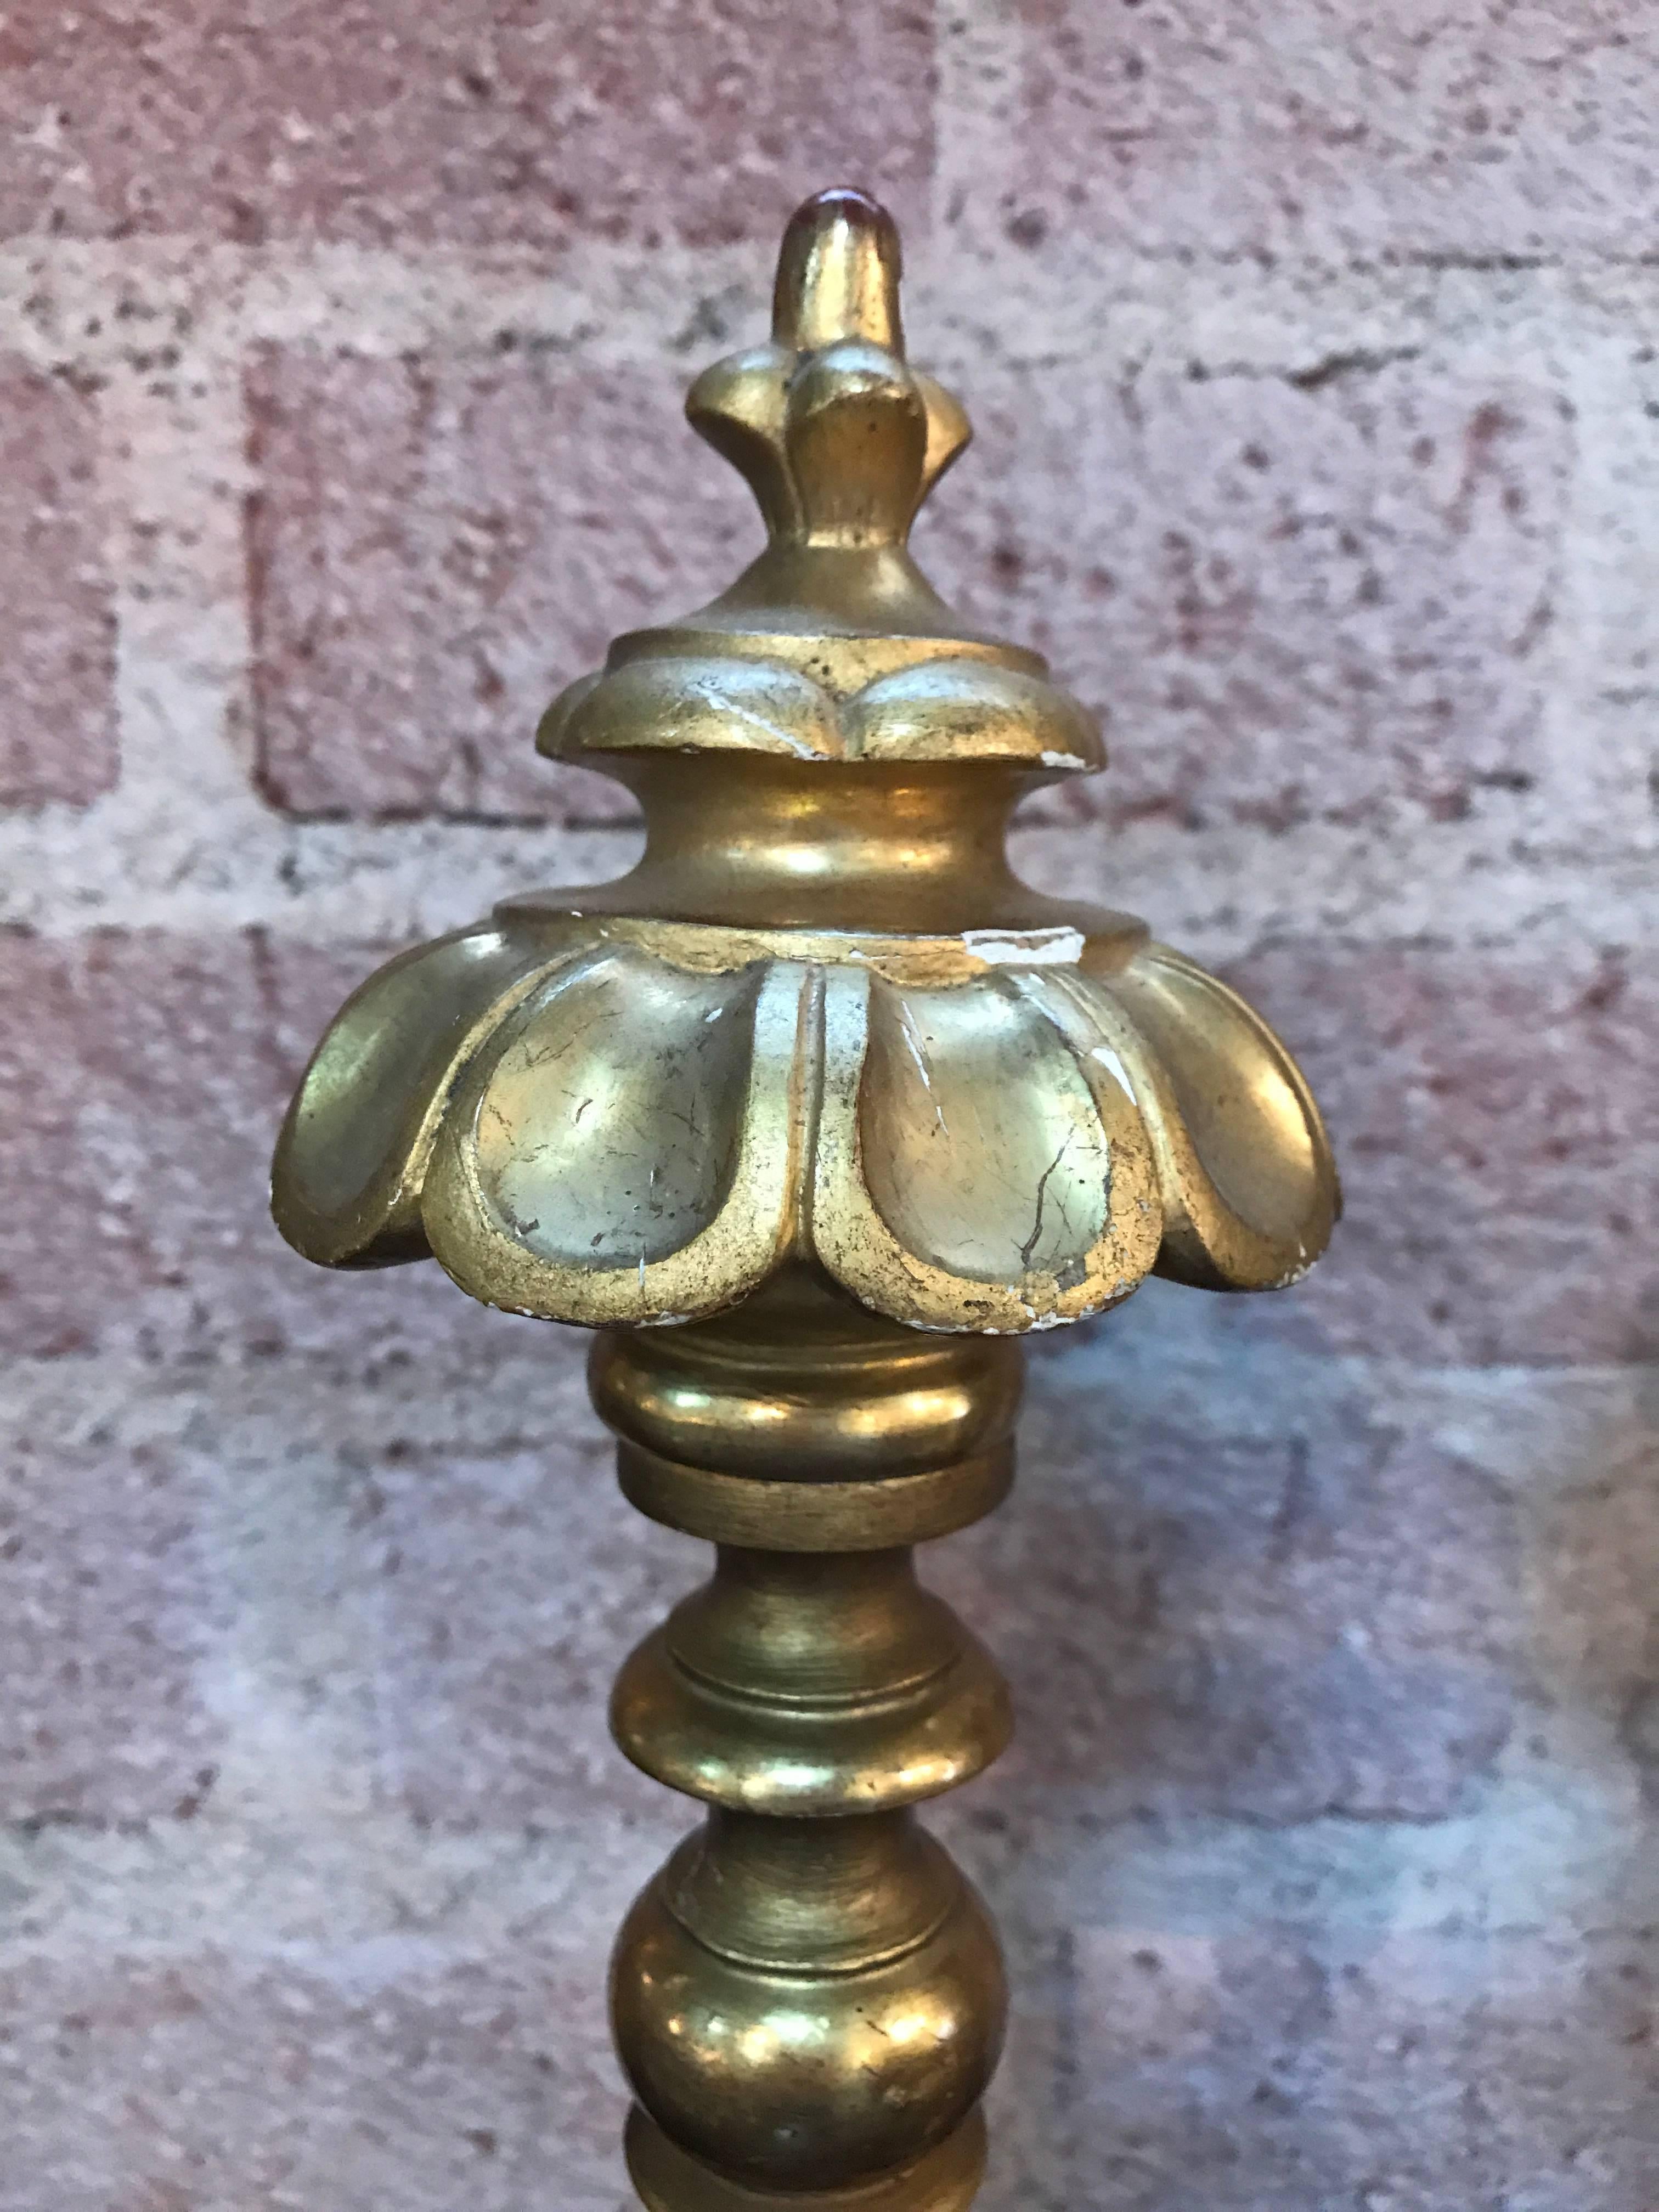 Pair of Italian 22-carat gold leaf carved wood finials that were originally used at the end of drapery rods. They have been mounted on Lucite bases a decoration for a table or bookshelf.